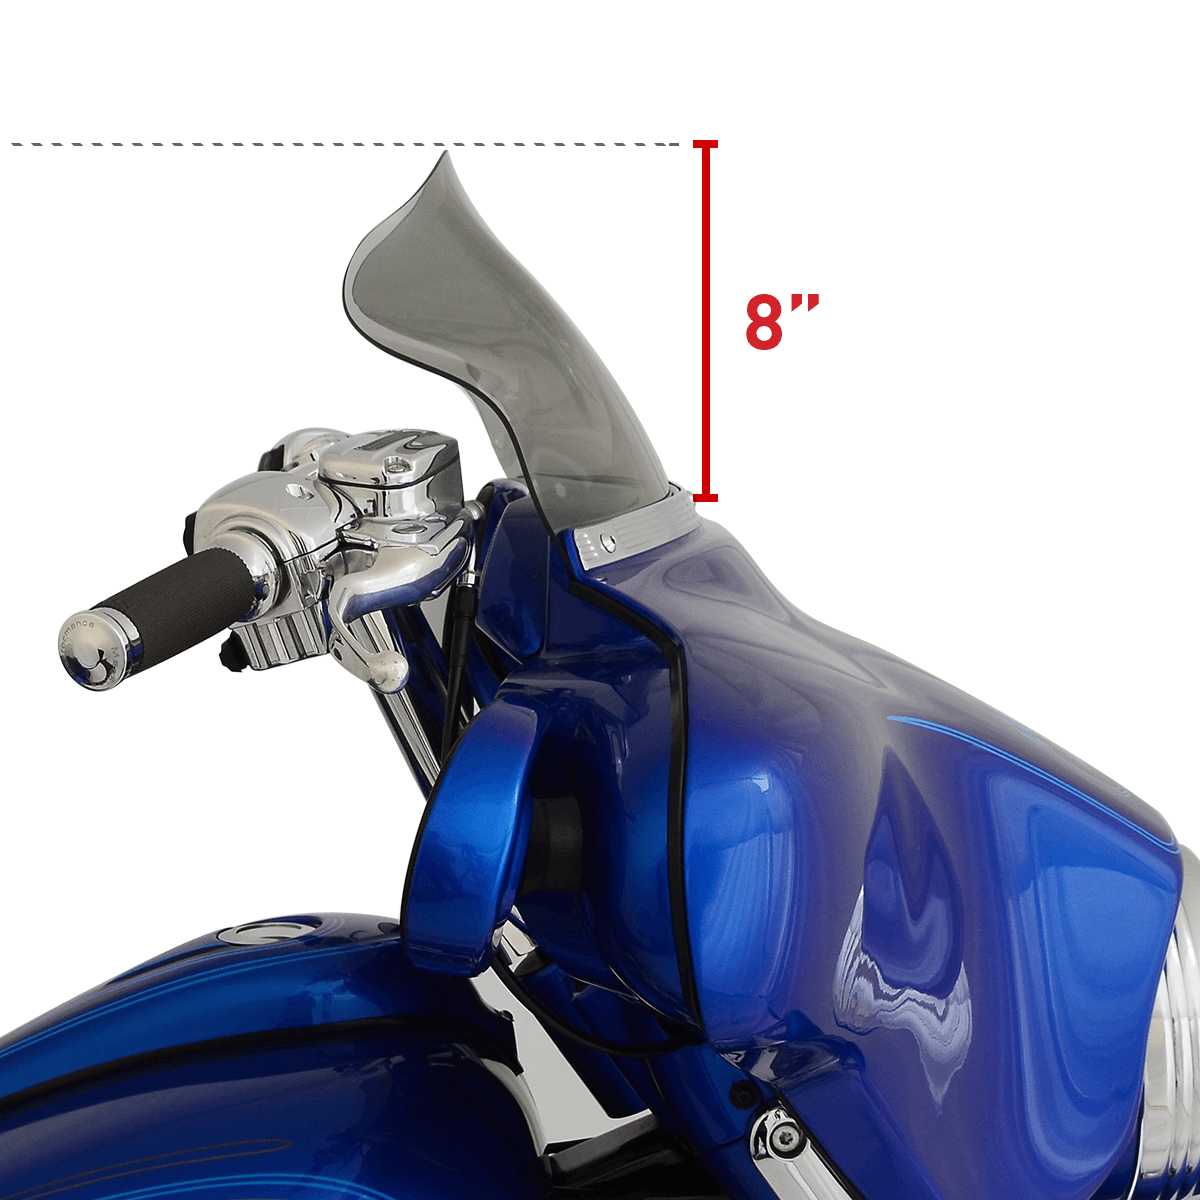 8.5" Tint Flare™ Windshield for Harley-Davidson 1996-2013 FLH Motorcycle Models(8.5" Tint)